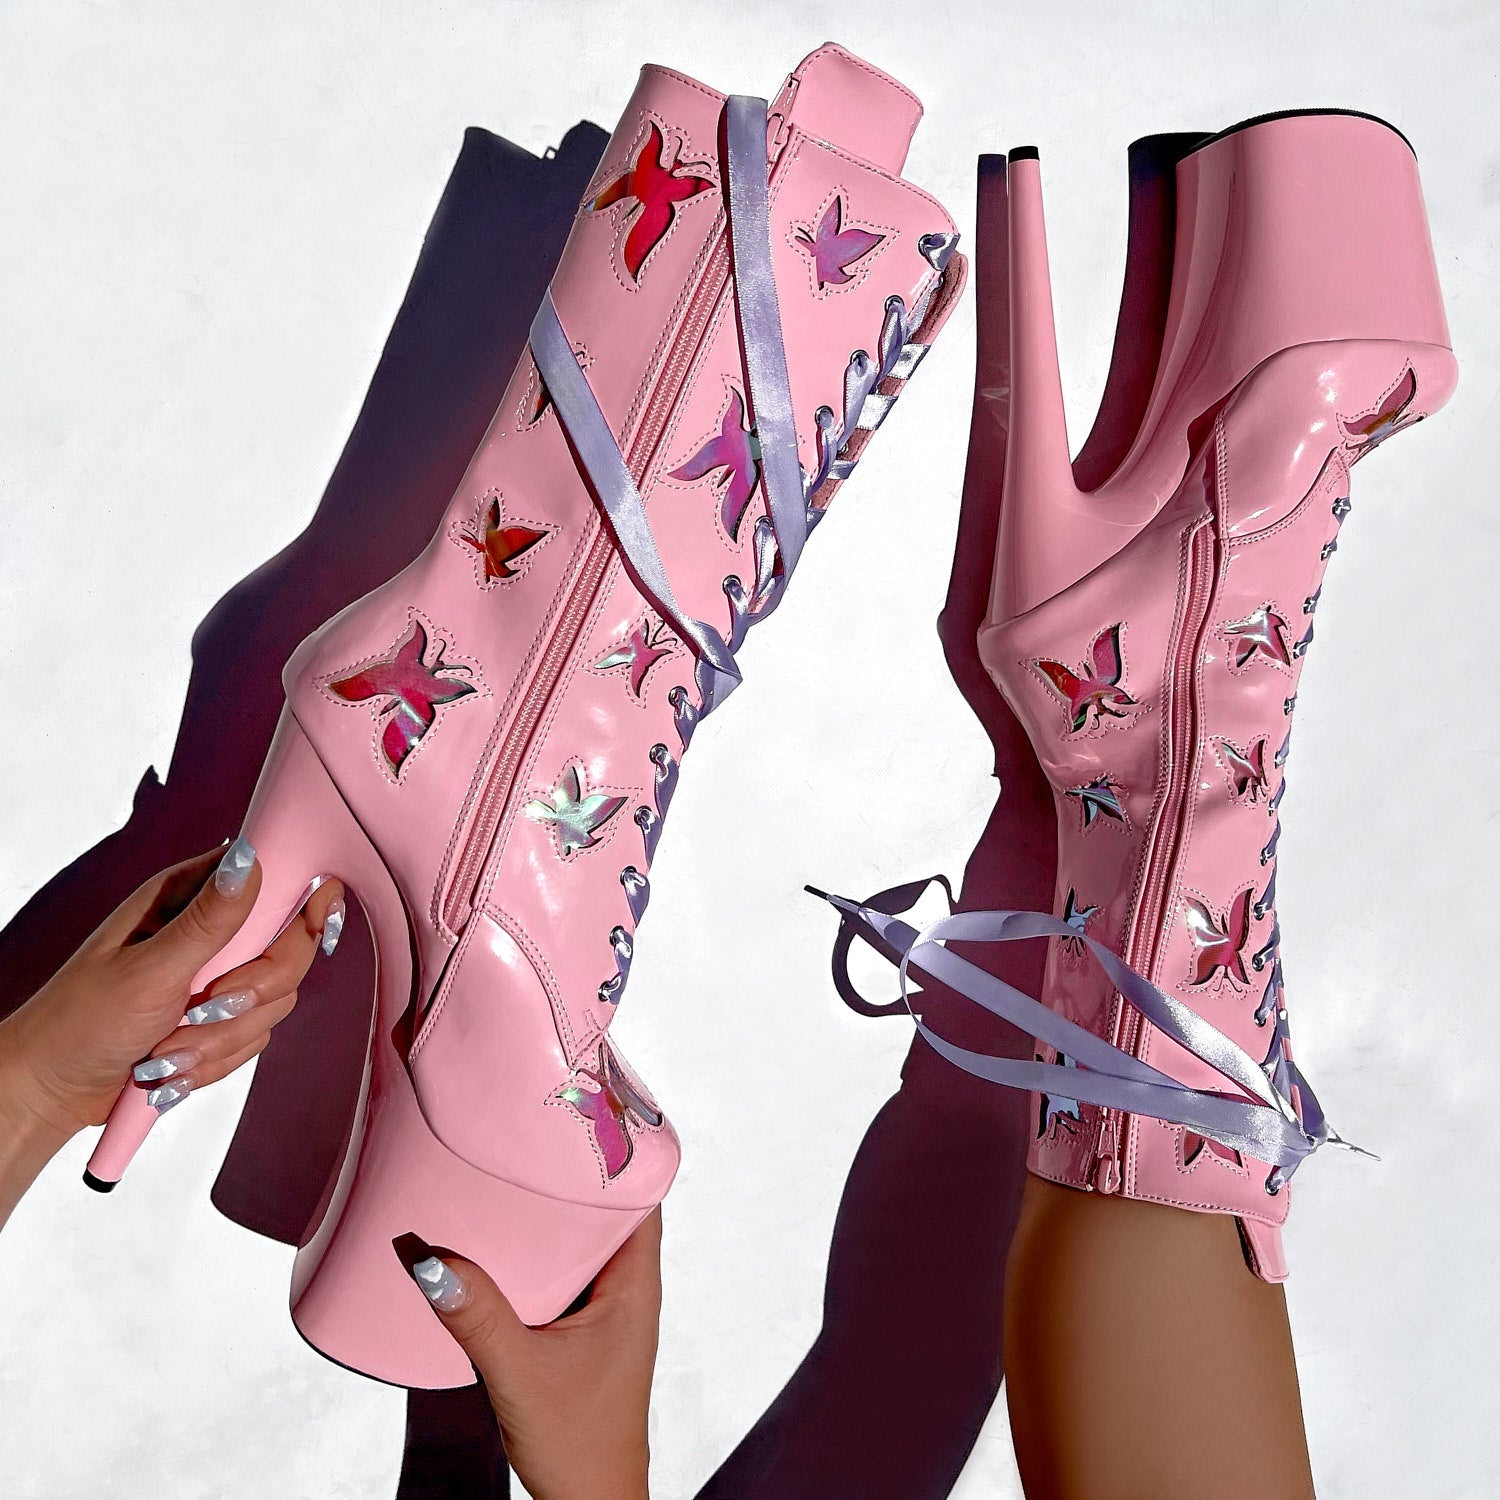 Hella Heels Butterfly 8inch Boots - Pink